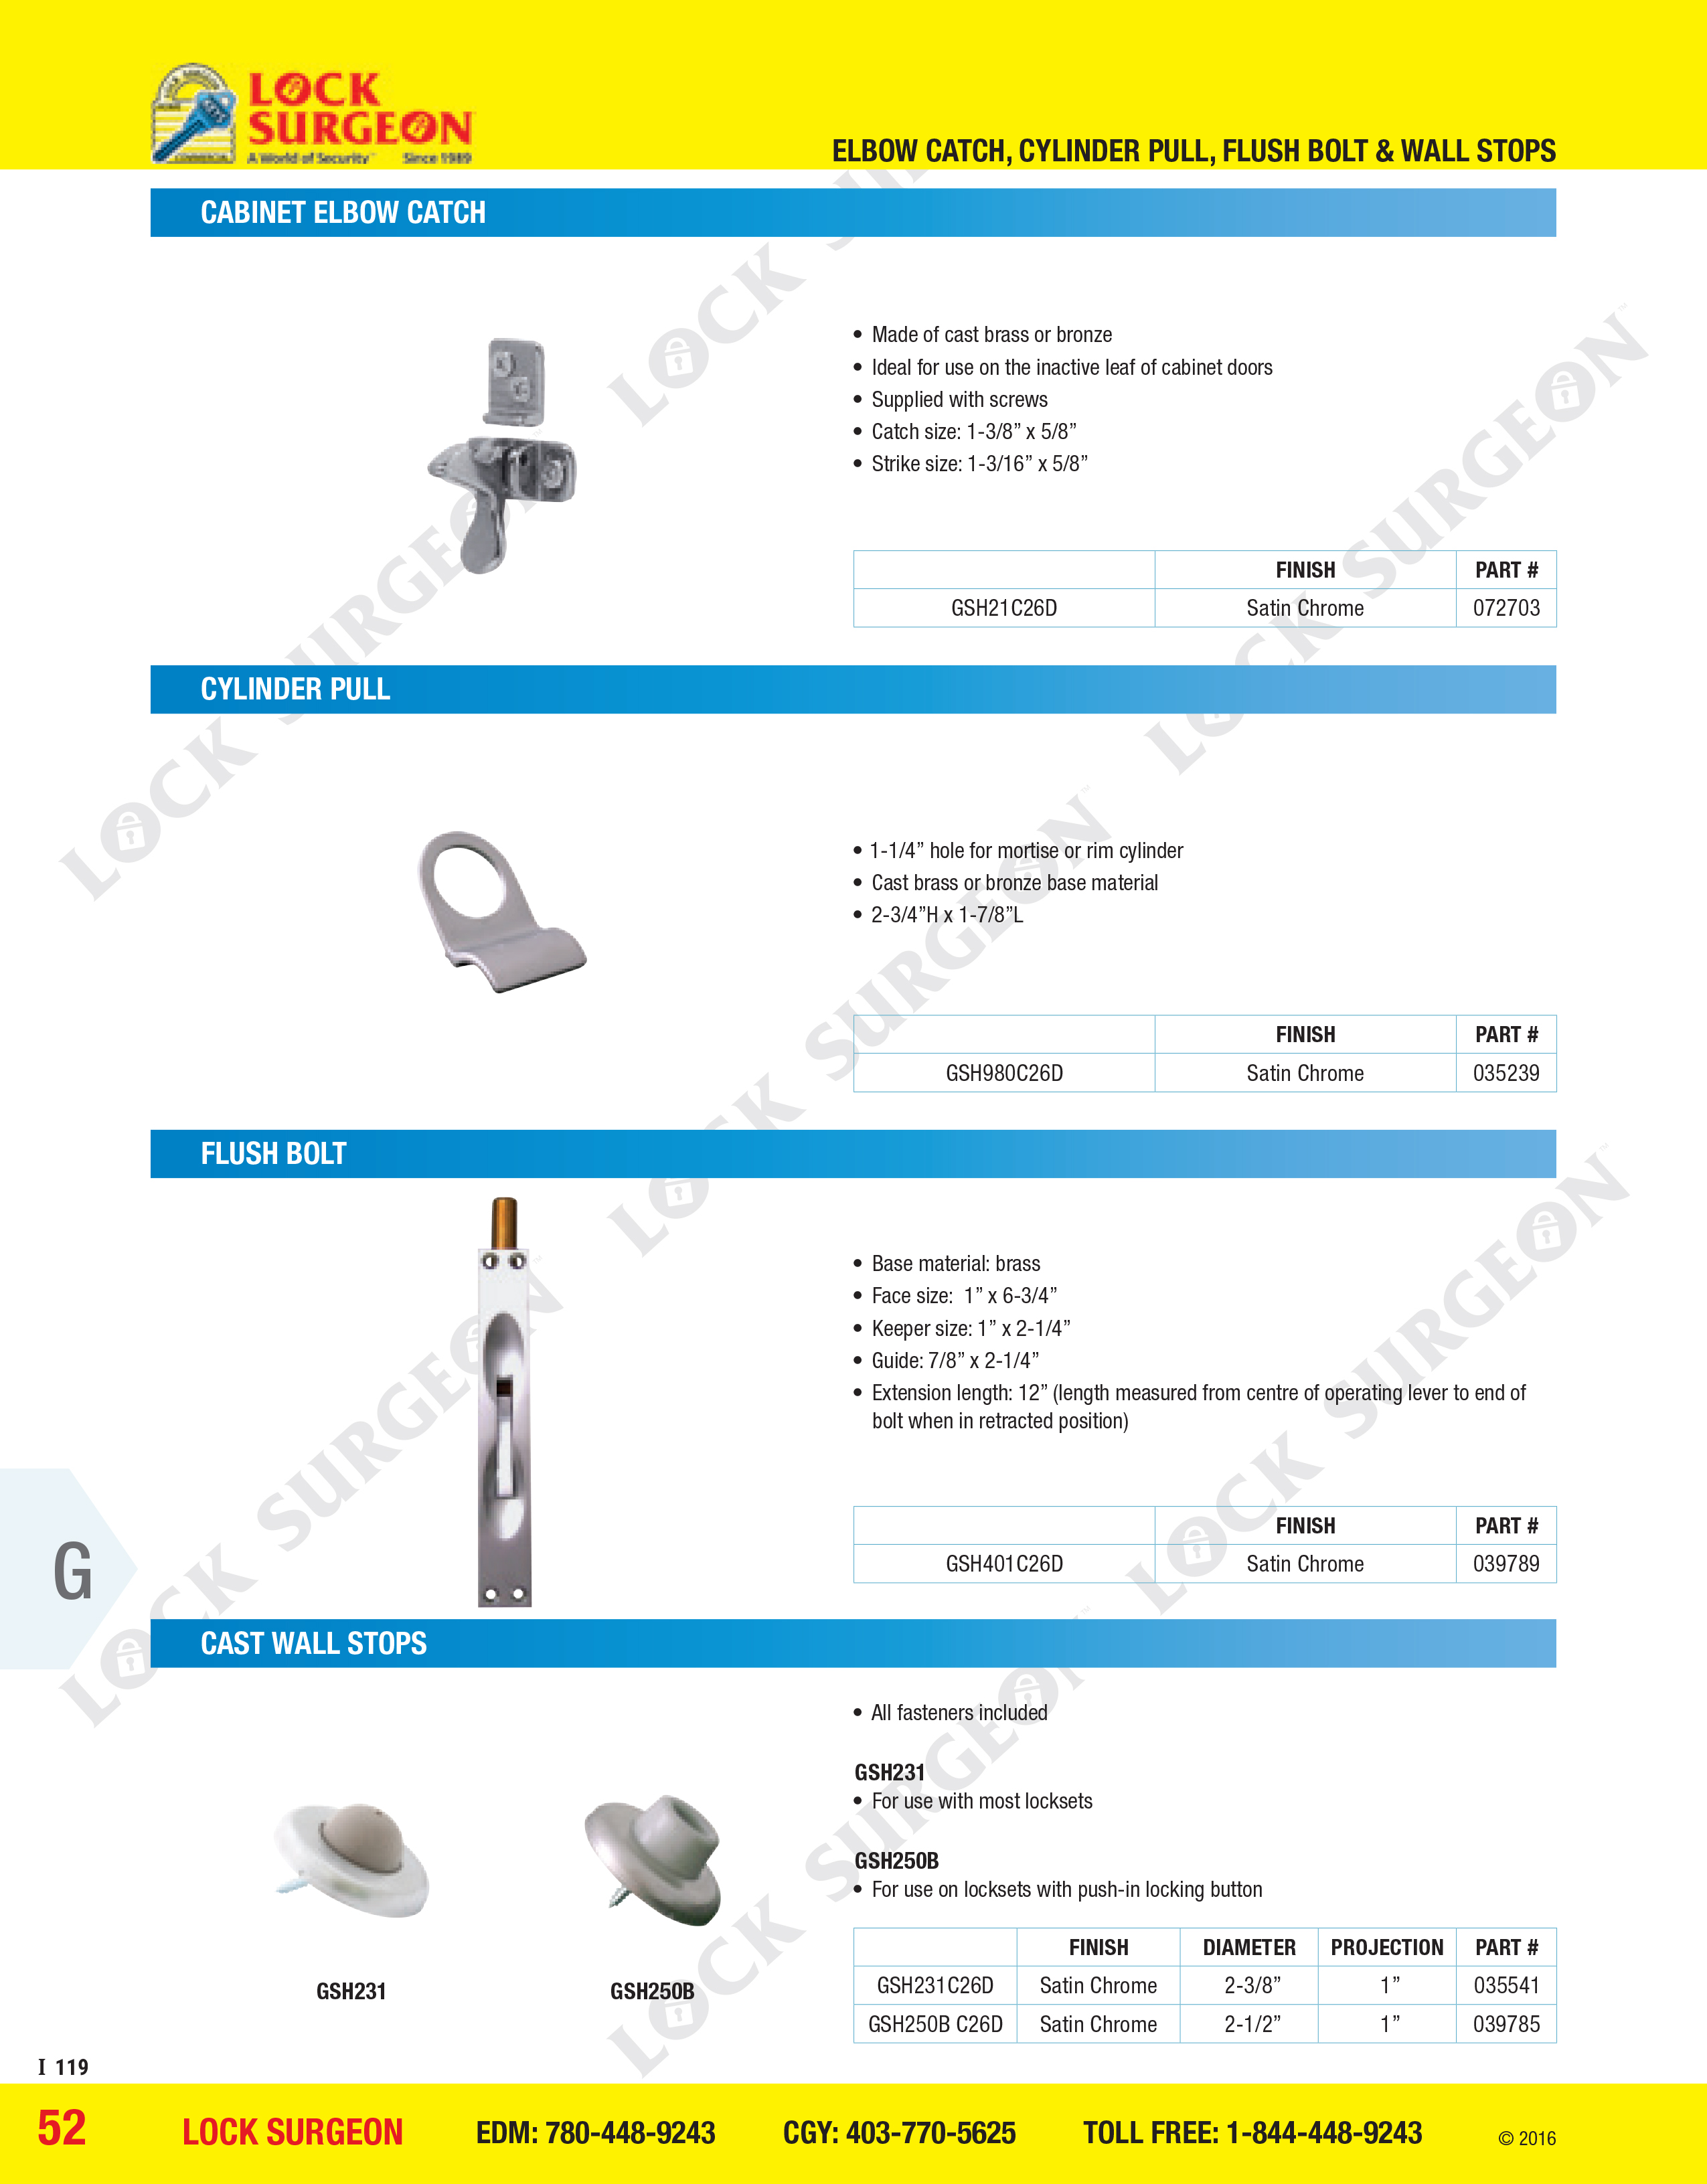 Gallery Elbow catch, Cabinet elbow catch, cylinder pull, flush bolt and cast wall stops.